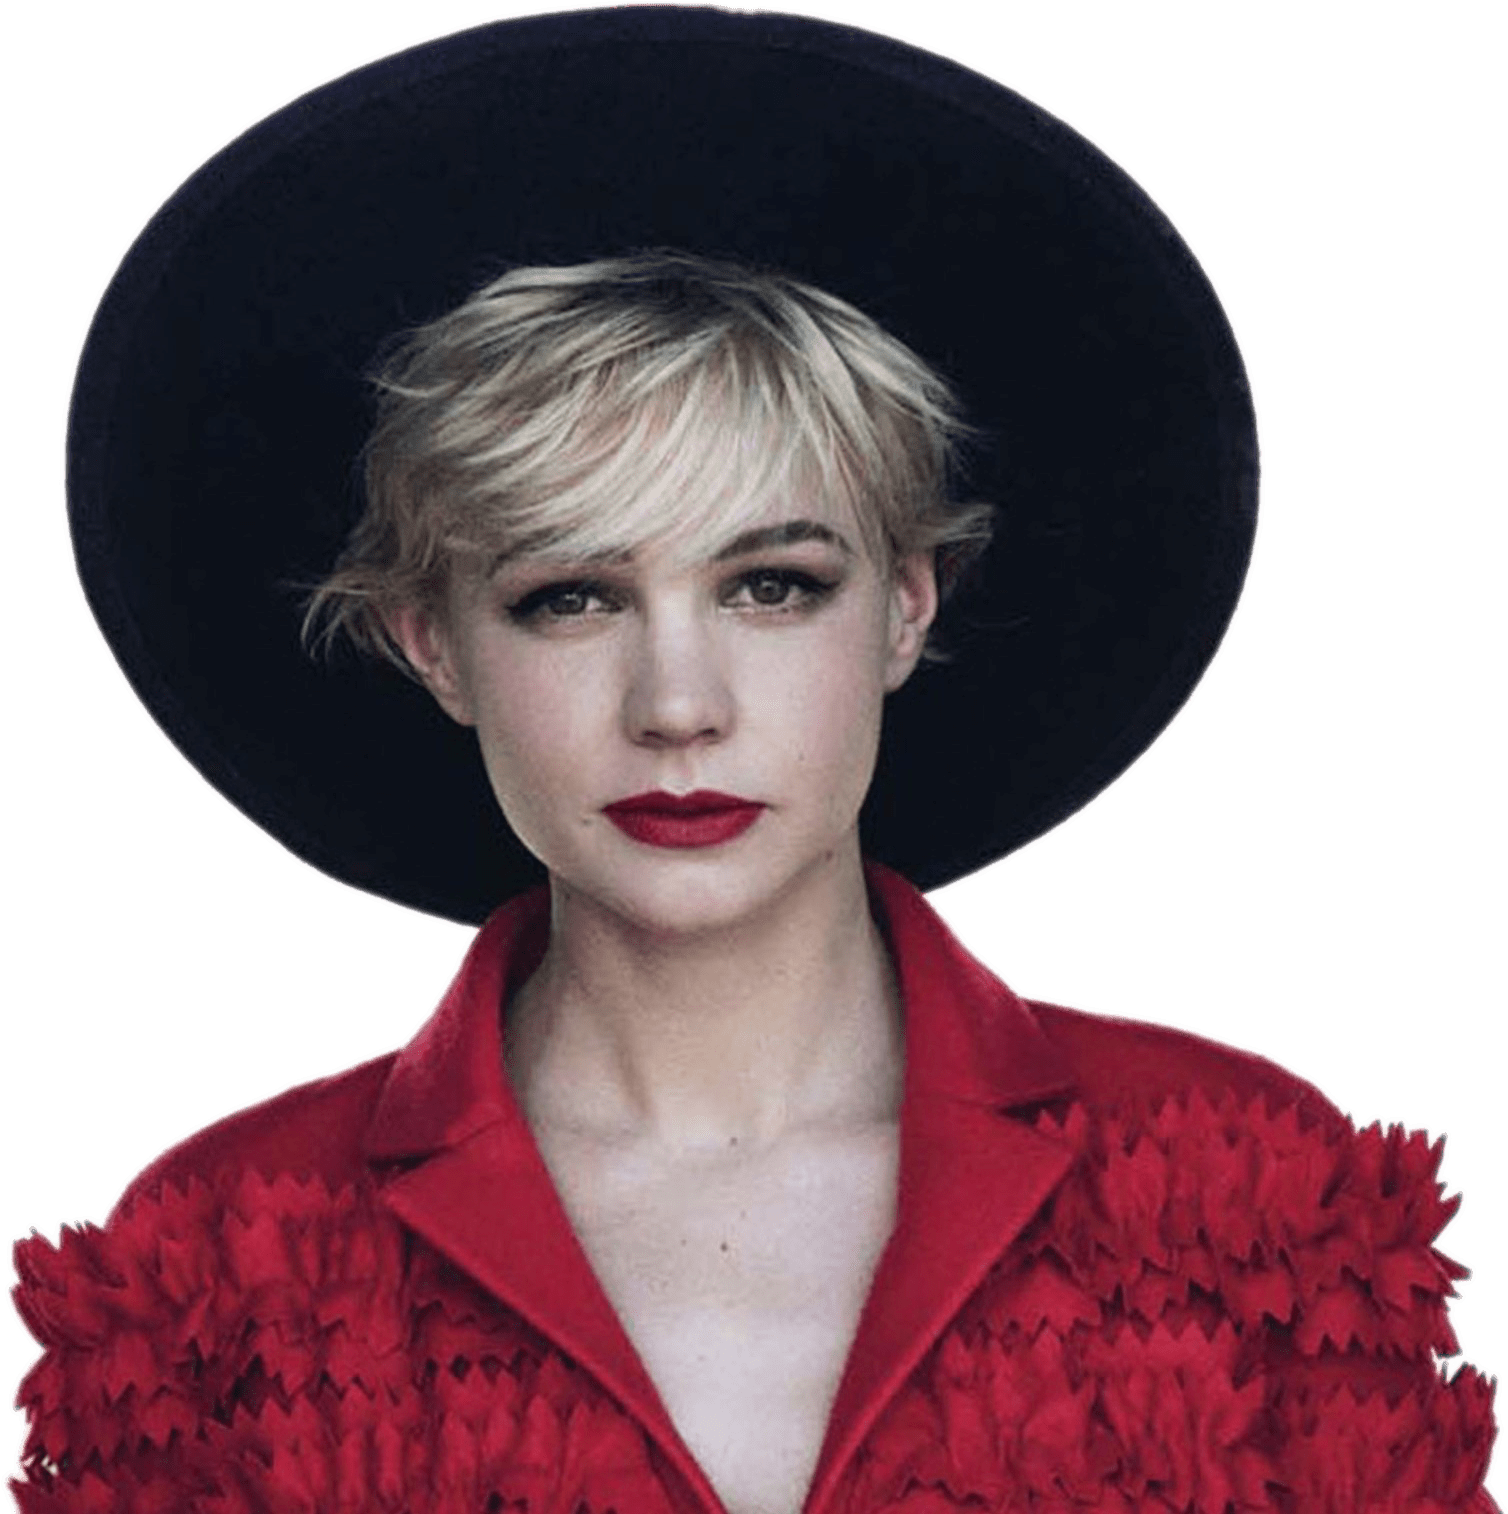 Stylish Womanin Black Hatand Red PNG